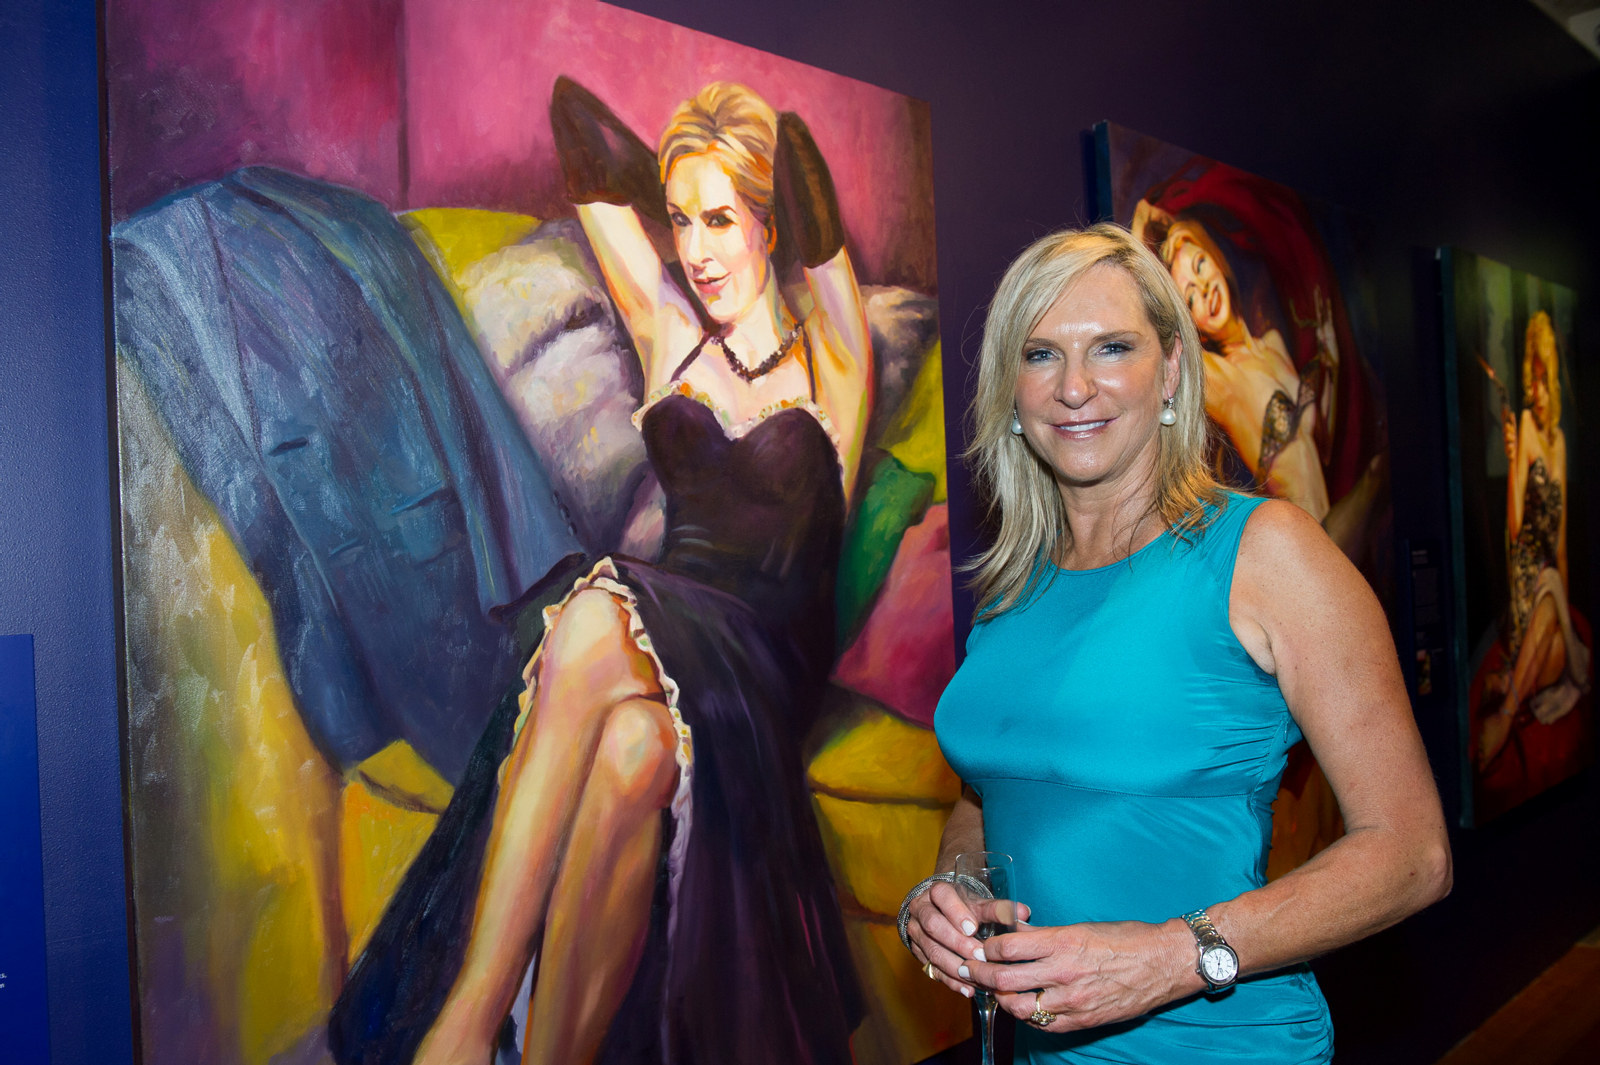 Skye Leckie wearing a blue dress and standing in front of her portrait She Couldn't be Good, at the opening of Wicked Women: an exhibition by Rosemary Valadon